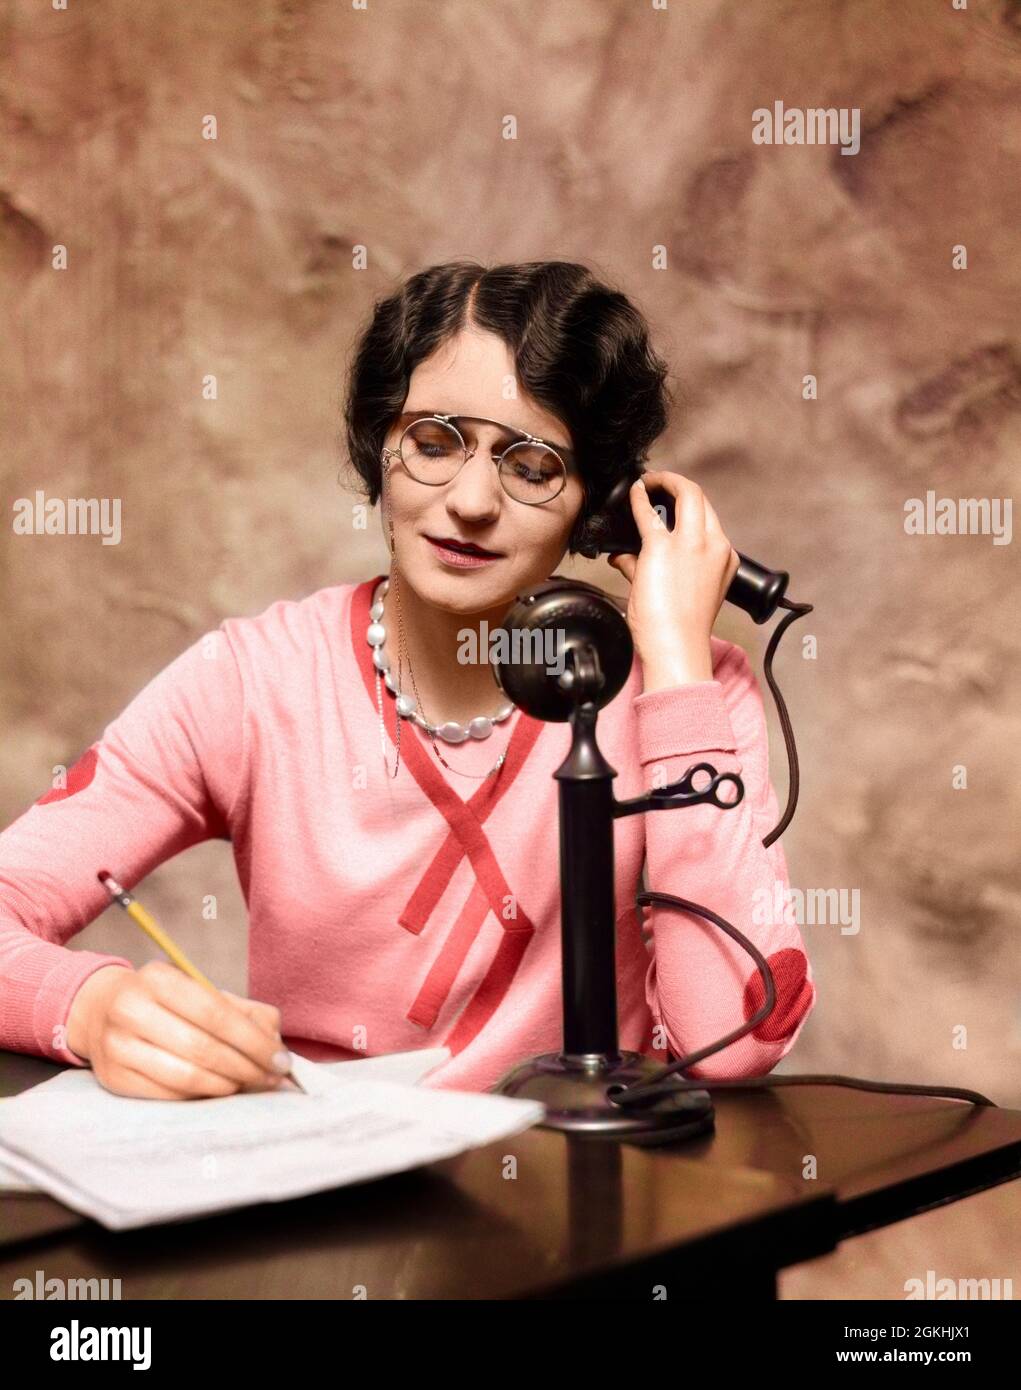 1920s WOMAN WEARING PINCE-NEZ GLASSES SITTING AT DESK TALKING ON CANDLESTICK PHONE AND WRITING - t2265c HAR001 HARS LISTEN FEMALES VERTICAL GROWNUP HOME LIFE COMMUNICATING SPEAK WRITE CHAT CANDLESTICK WOMAN'S RELEASES OFFICES OPTICAL TELEPHONING CHATTER CUSTOMER SERVICE WOMAN'S LIBERATION WOMEN'S RIGHTS LIB PENCILS WOMAN'S RIGHTS WOMEN'S LIB WOMEN'S LIBERATION CANDLESTICK PHONE RIGHTS PINCE-NEZ OCCUPATIONS OFFICE MACHINE PHONES CONNECTION TELEPHONES PHONING SECRETARIES STYLISH WRITER LIBERATION WOMEN'S ADMINISTER COMMUNICATE MID-ADULT MID-ADULT WOMAN YOUNG ADULT WOMAN CAUCASIAN ETHNICITY Stock Photo